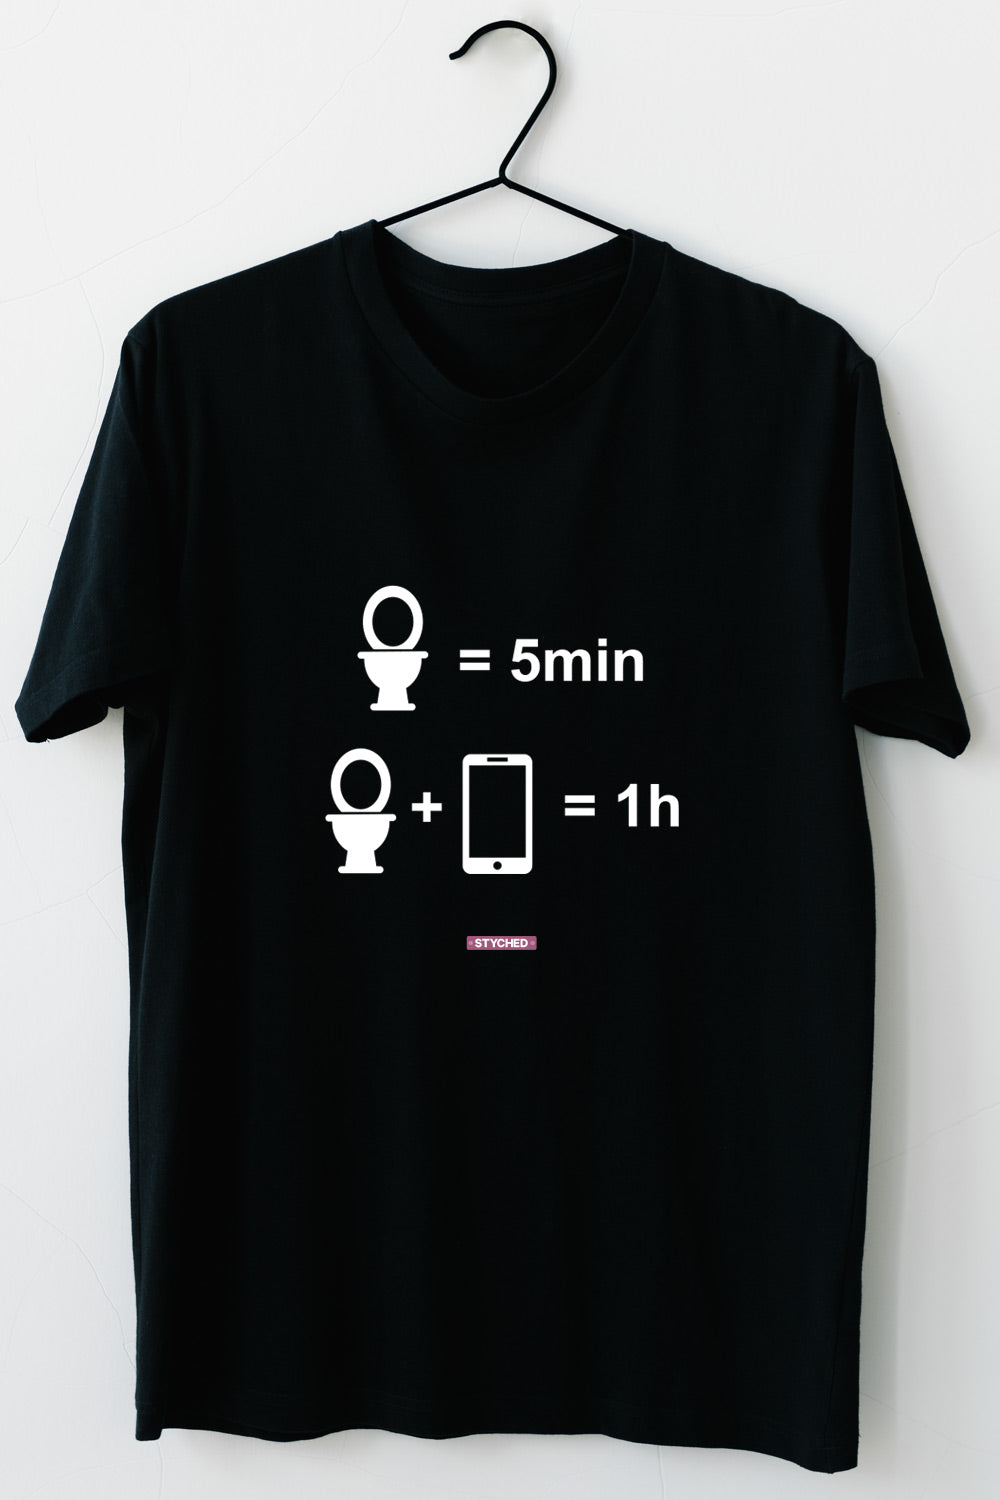 Paytm Exclusive - Time in restroom with phone - Quirky Graphic T-Shirt Black Color